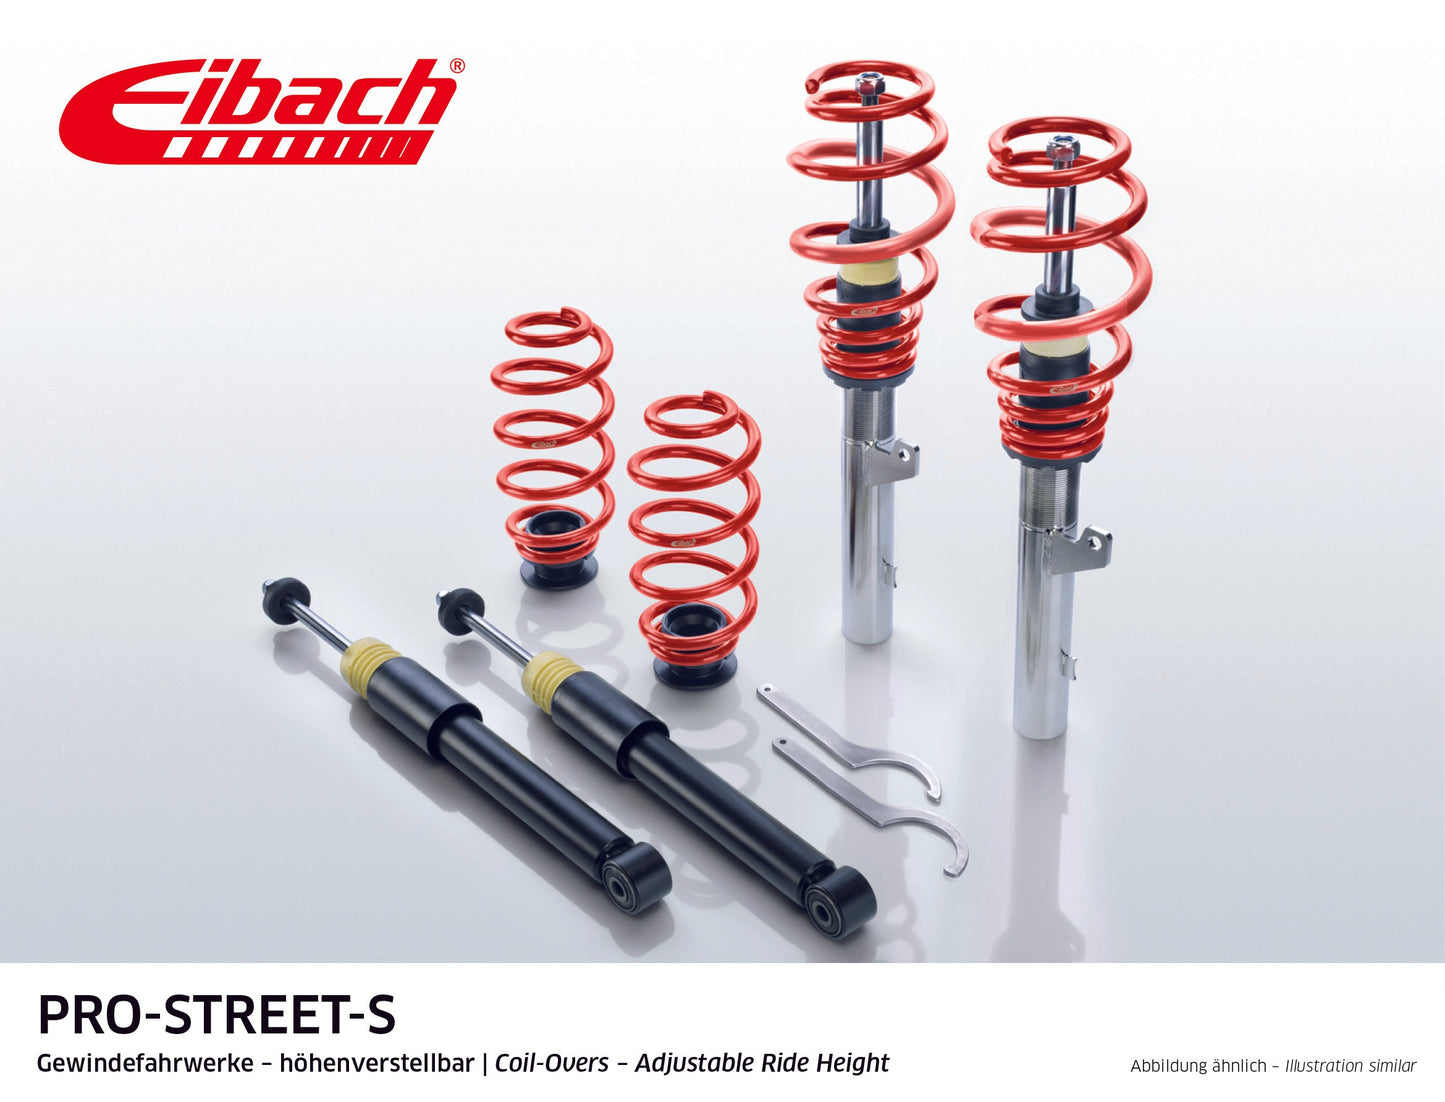 Eibach Pro-Street Coilover (PSS65-20-005-02-22) at £1303.00